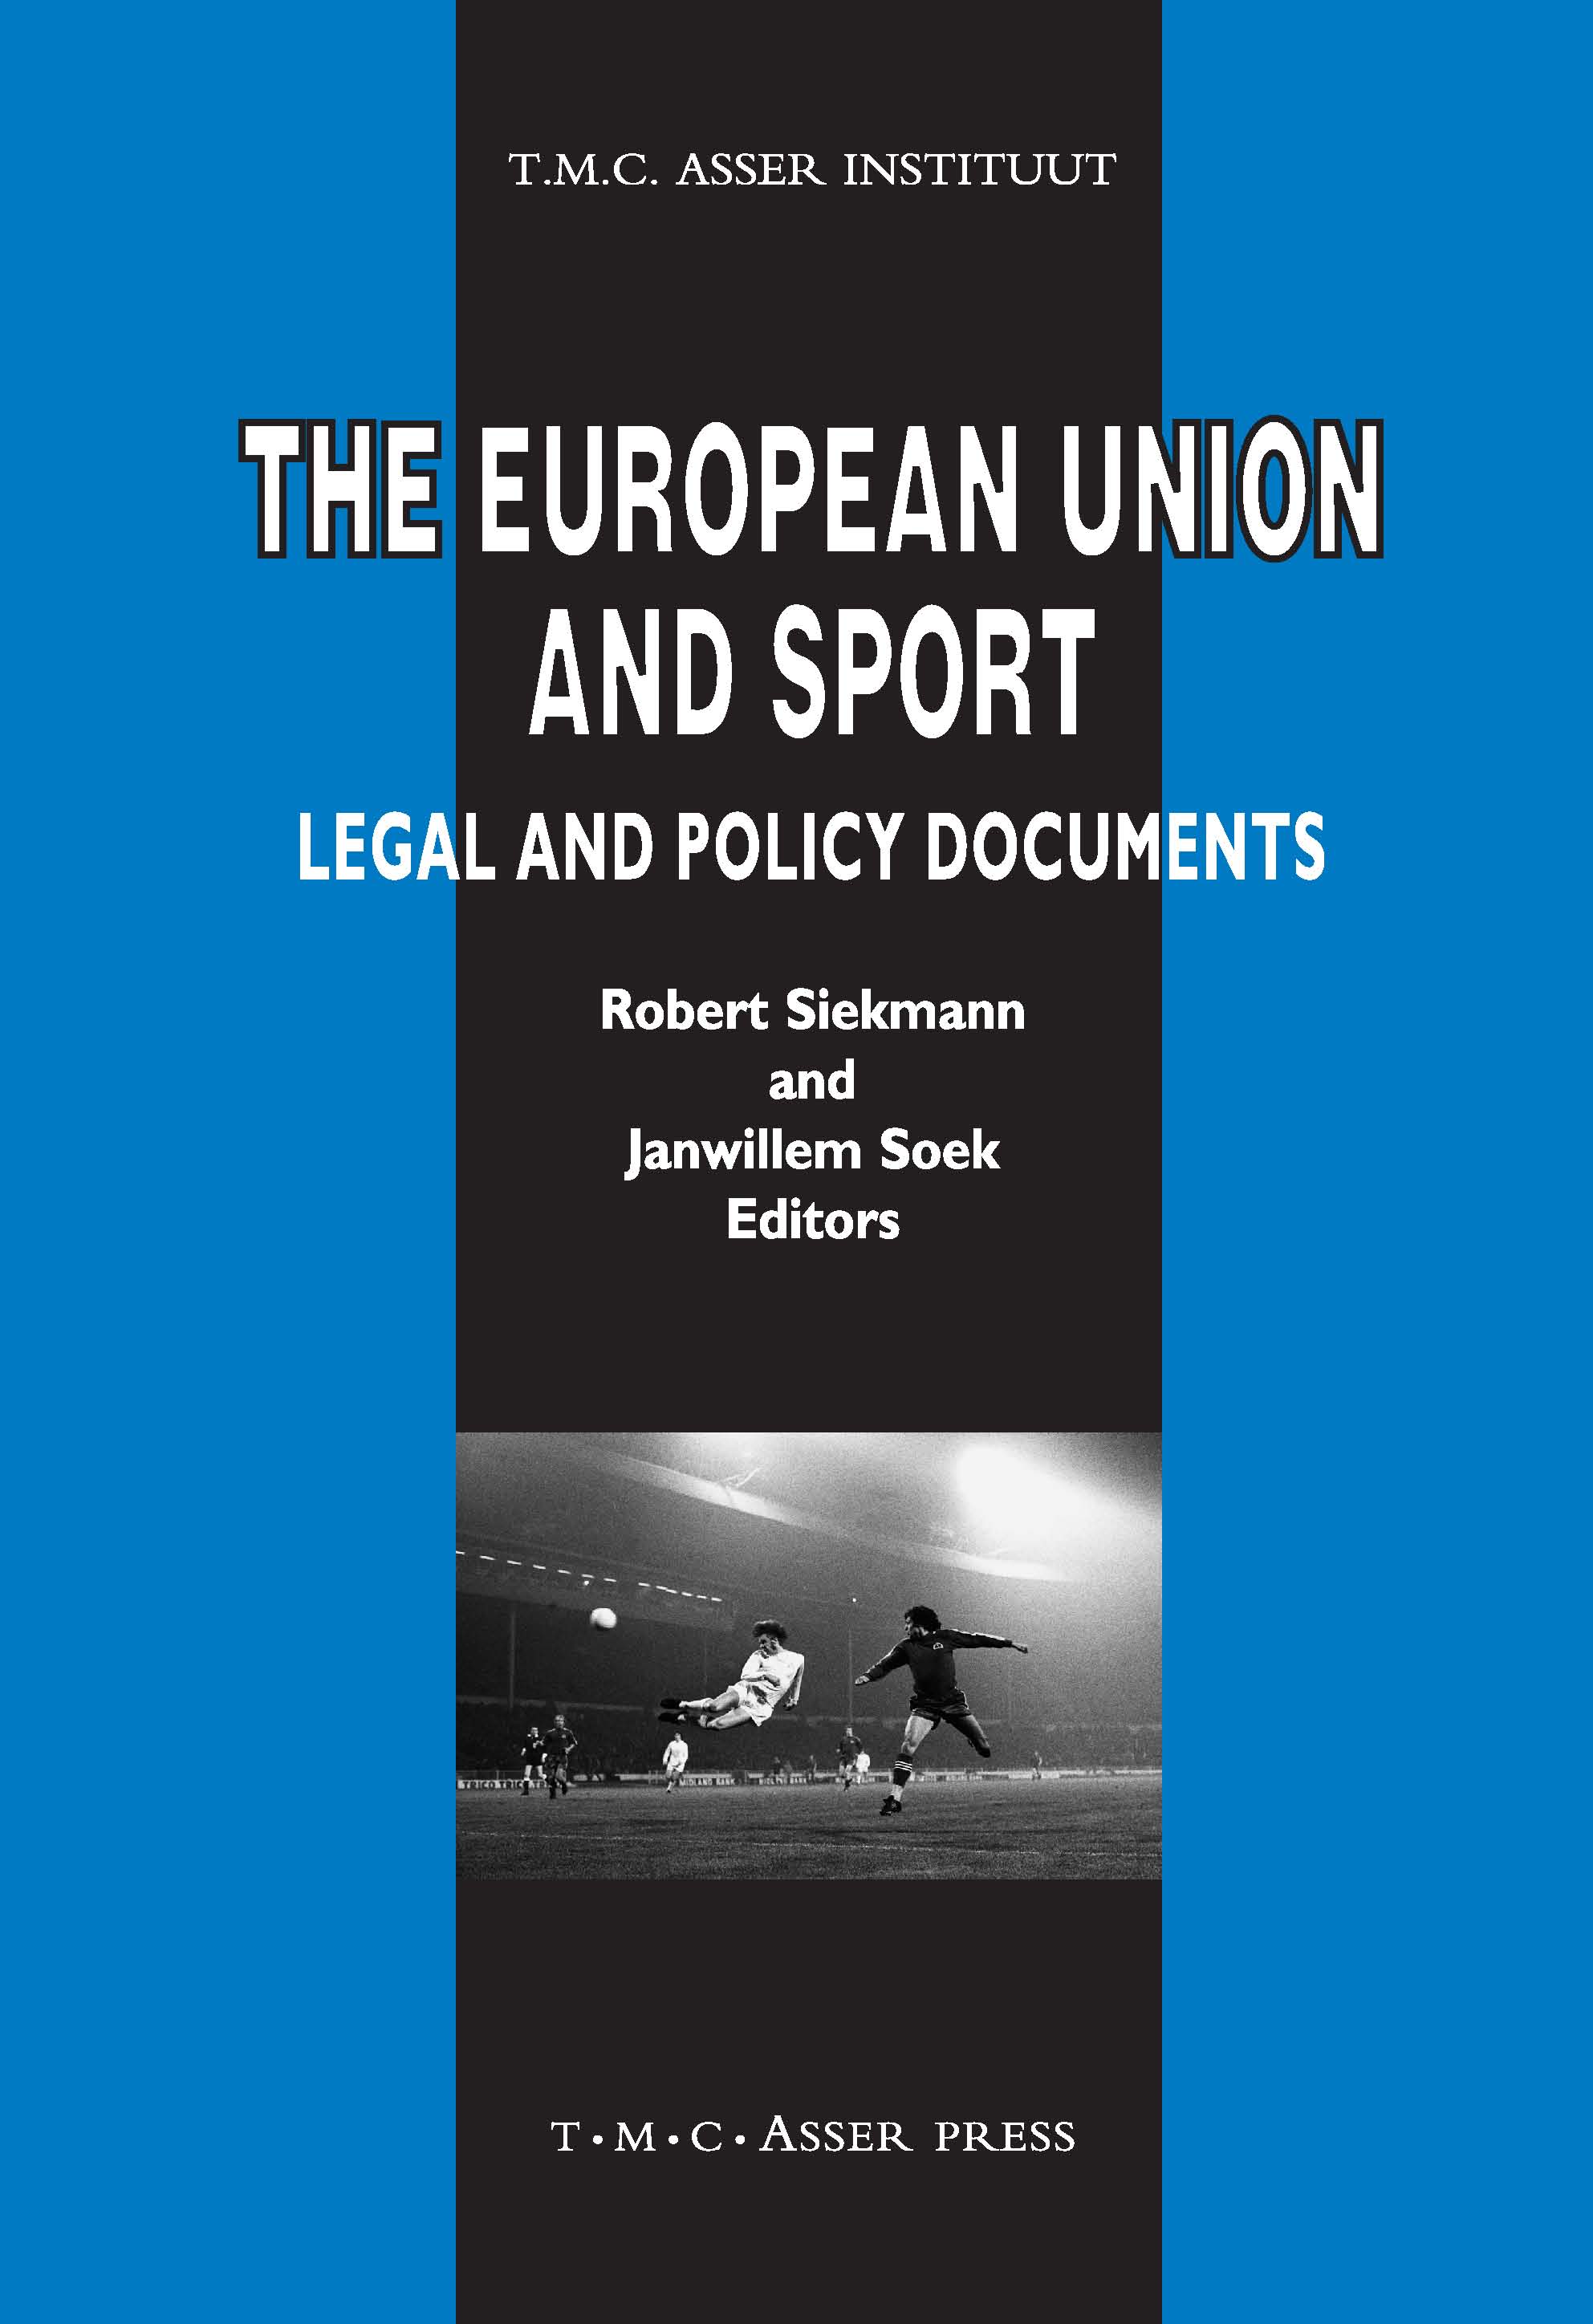 The European Union and Sport - Legal and Policy Documents